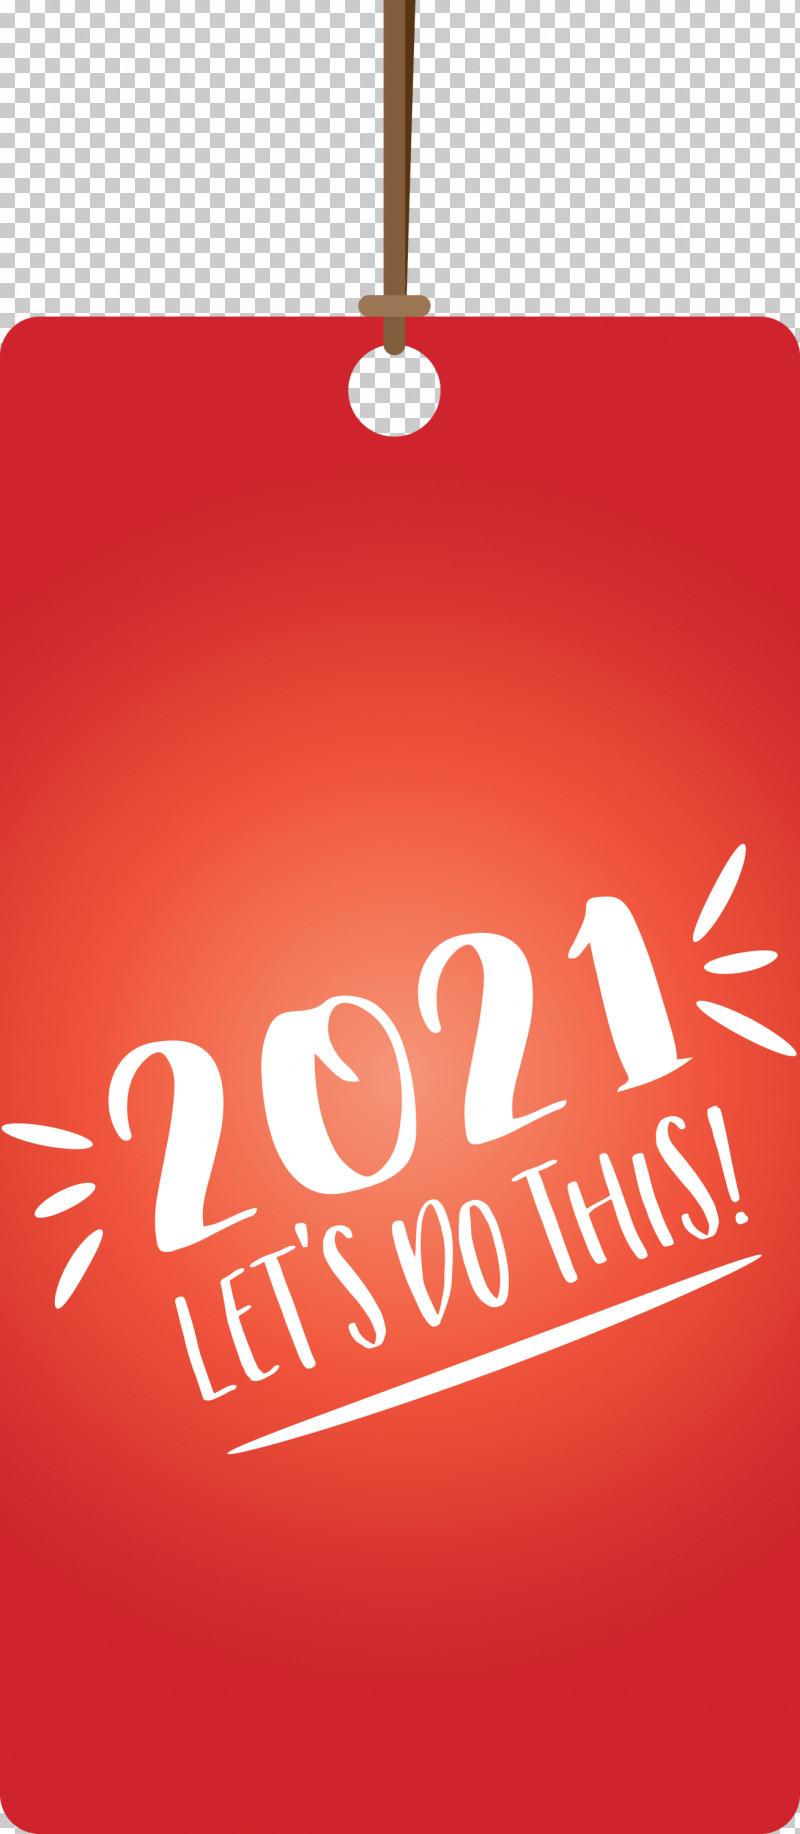 2021 Happy New Year 2021 Happy New Year Tag 2021 New Year PNG, Clipart, 2021 Happy New Year, 2021 Happy New Year Tag, 2021 New Year, Christmas Day, Christmas Ornament Free PNG Download